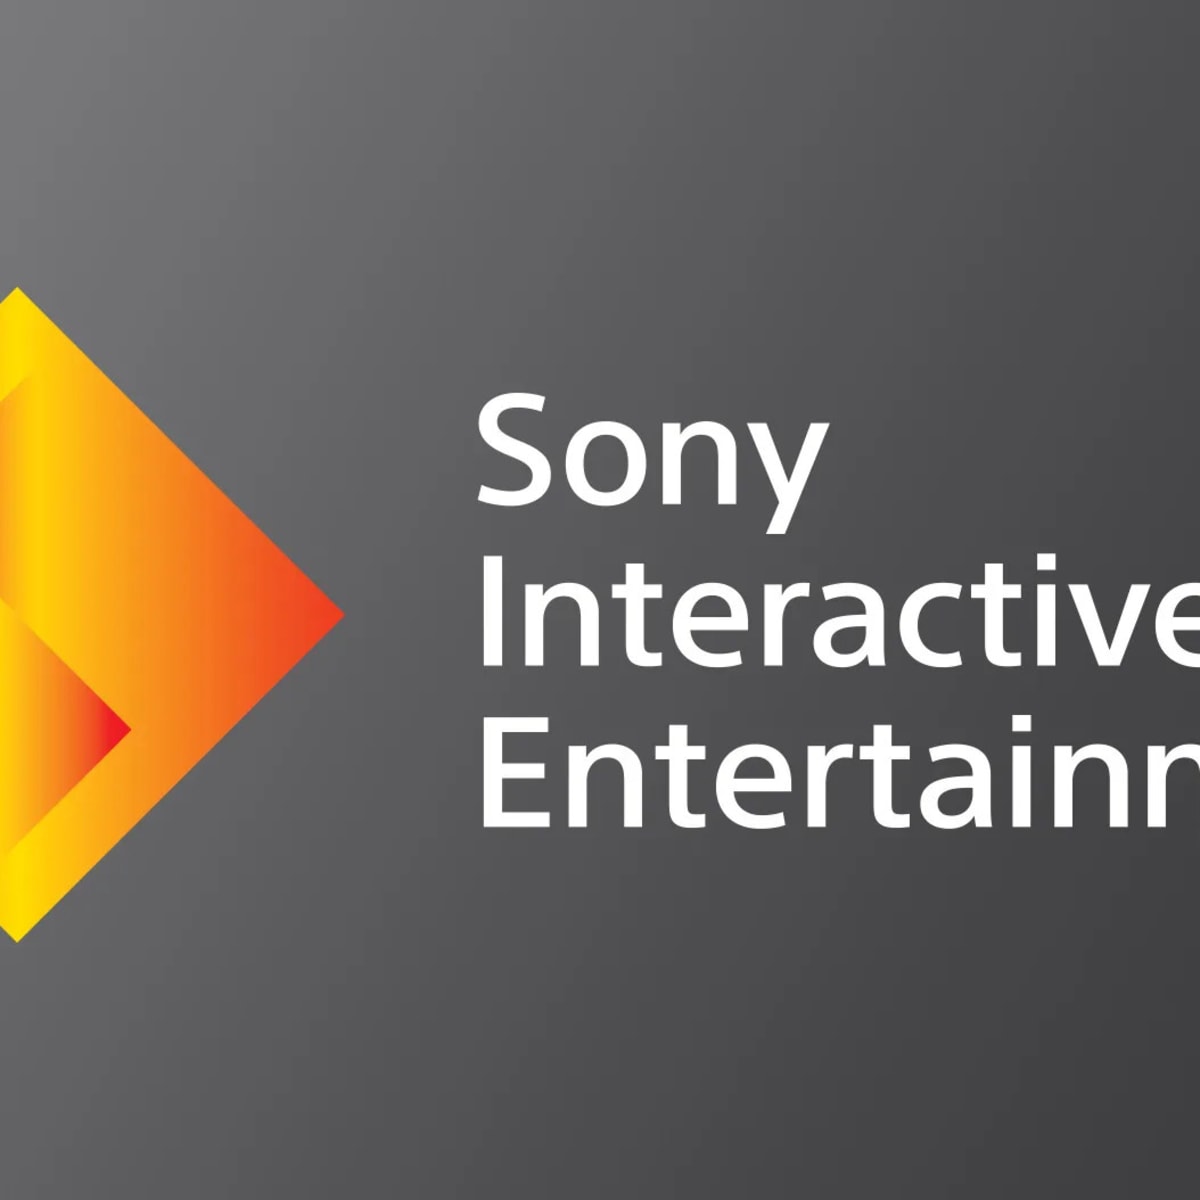 Sony layoffs: Company to cut 900 workers from PlayStation division